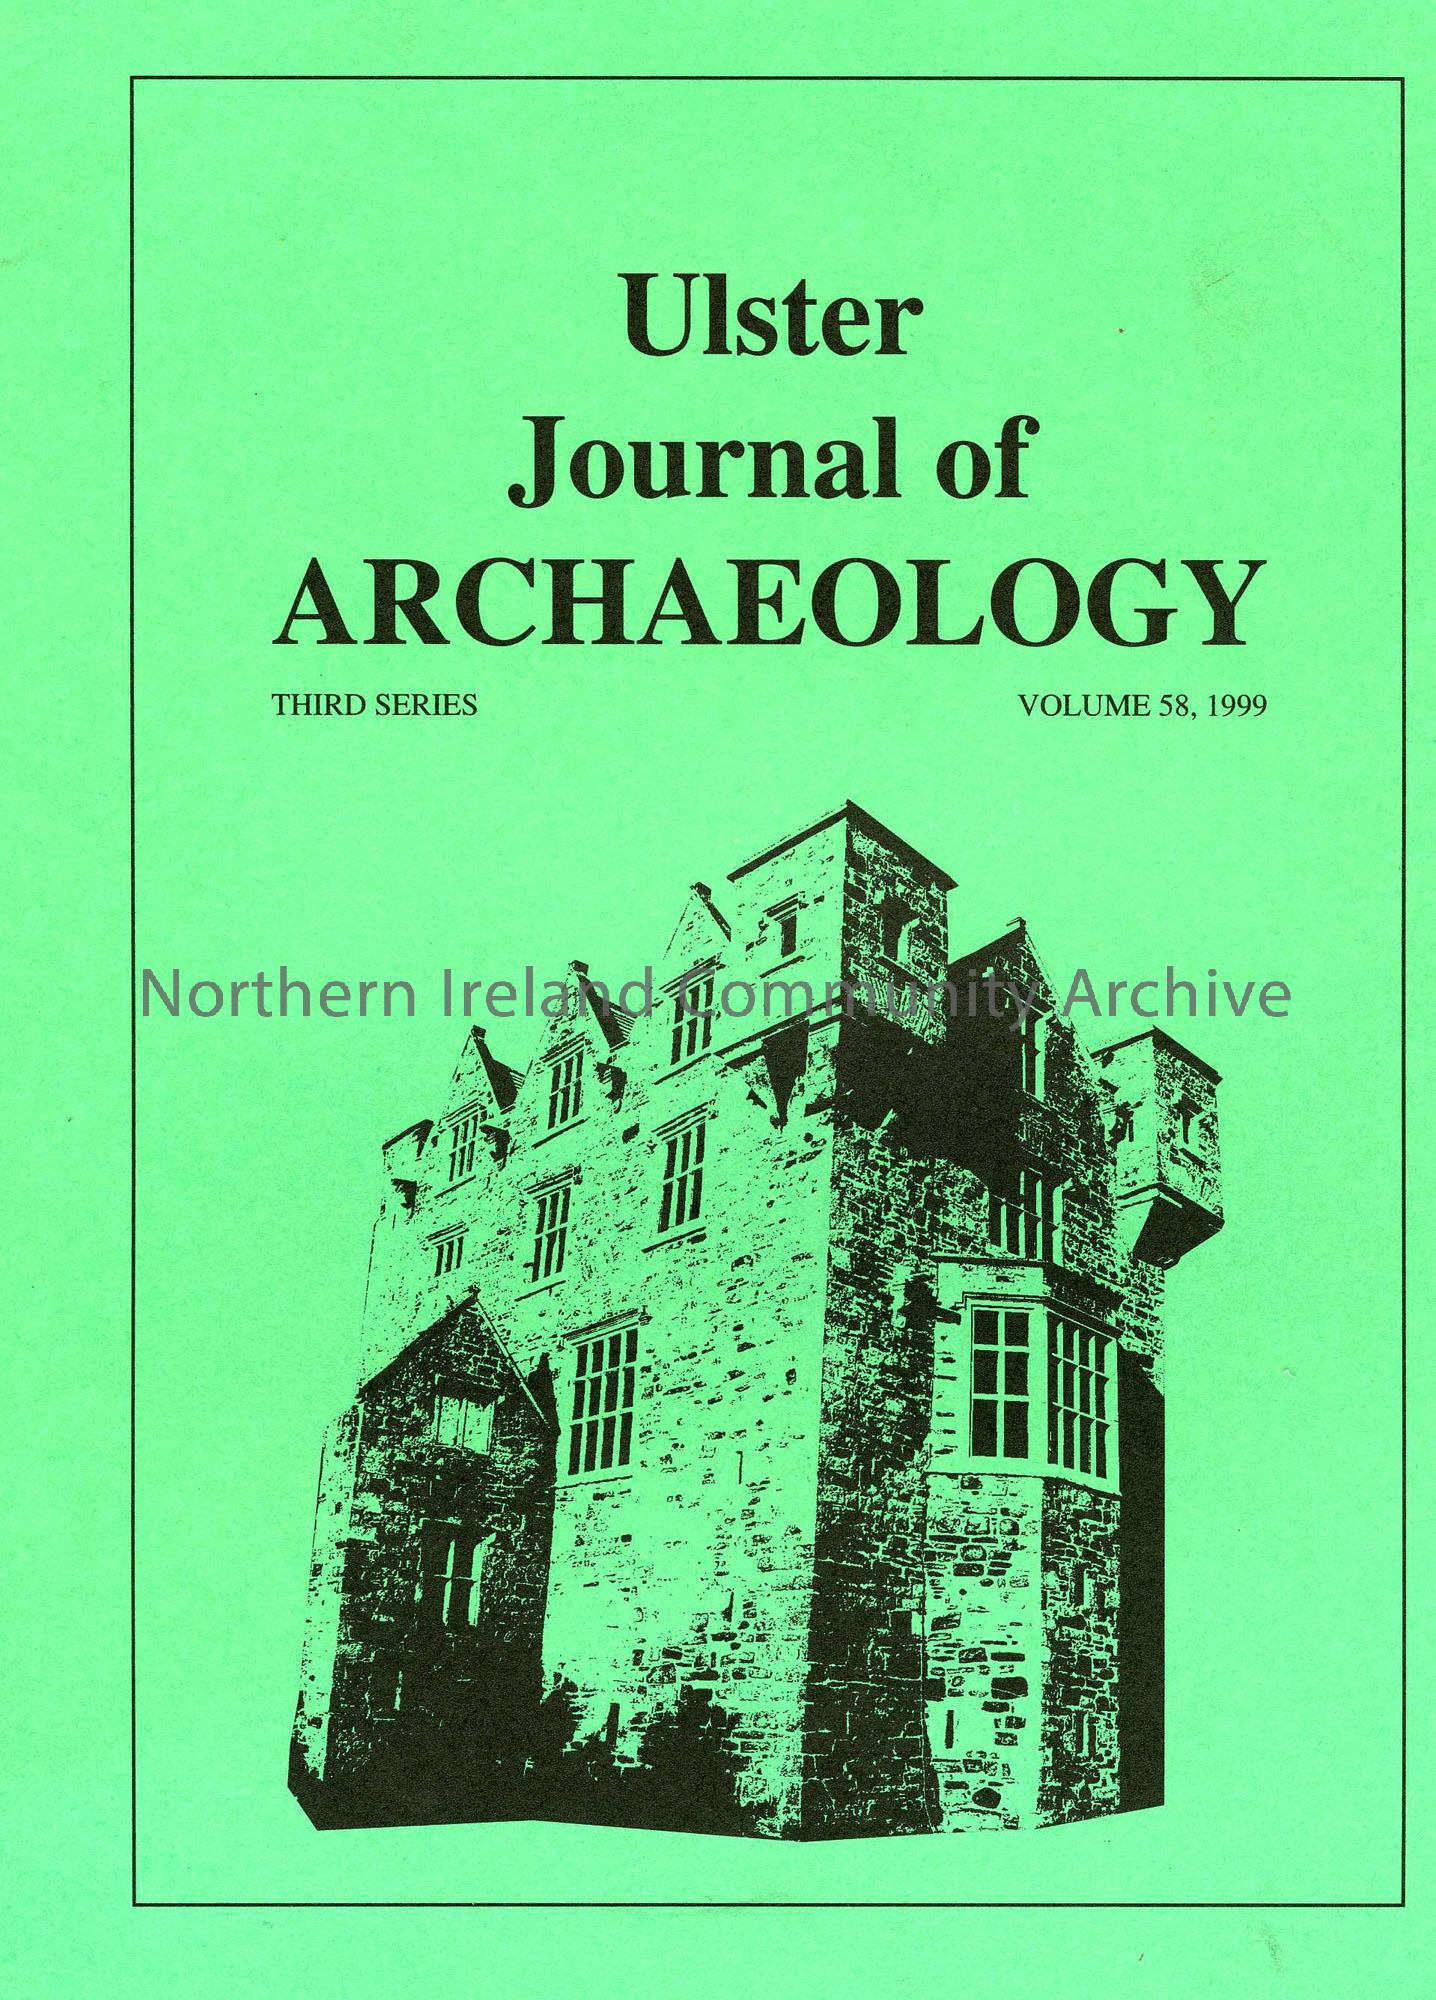 book titled, Ulster Journal of Archaeology. Third Series Volume 58, 1999 (4925)